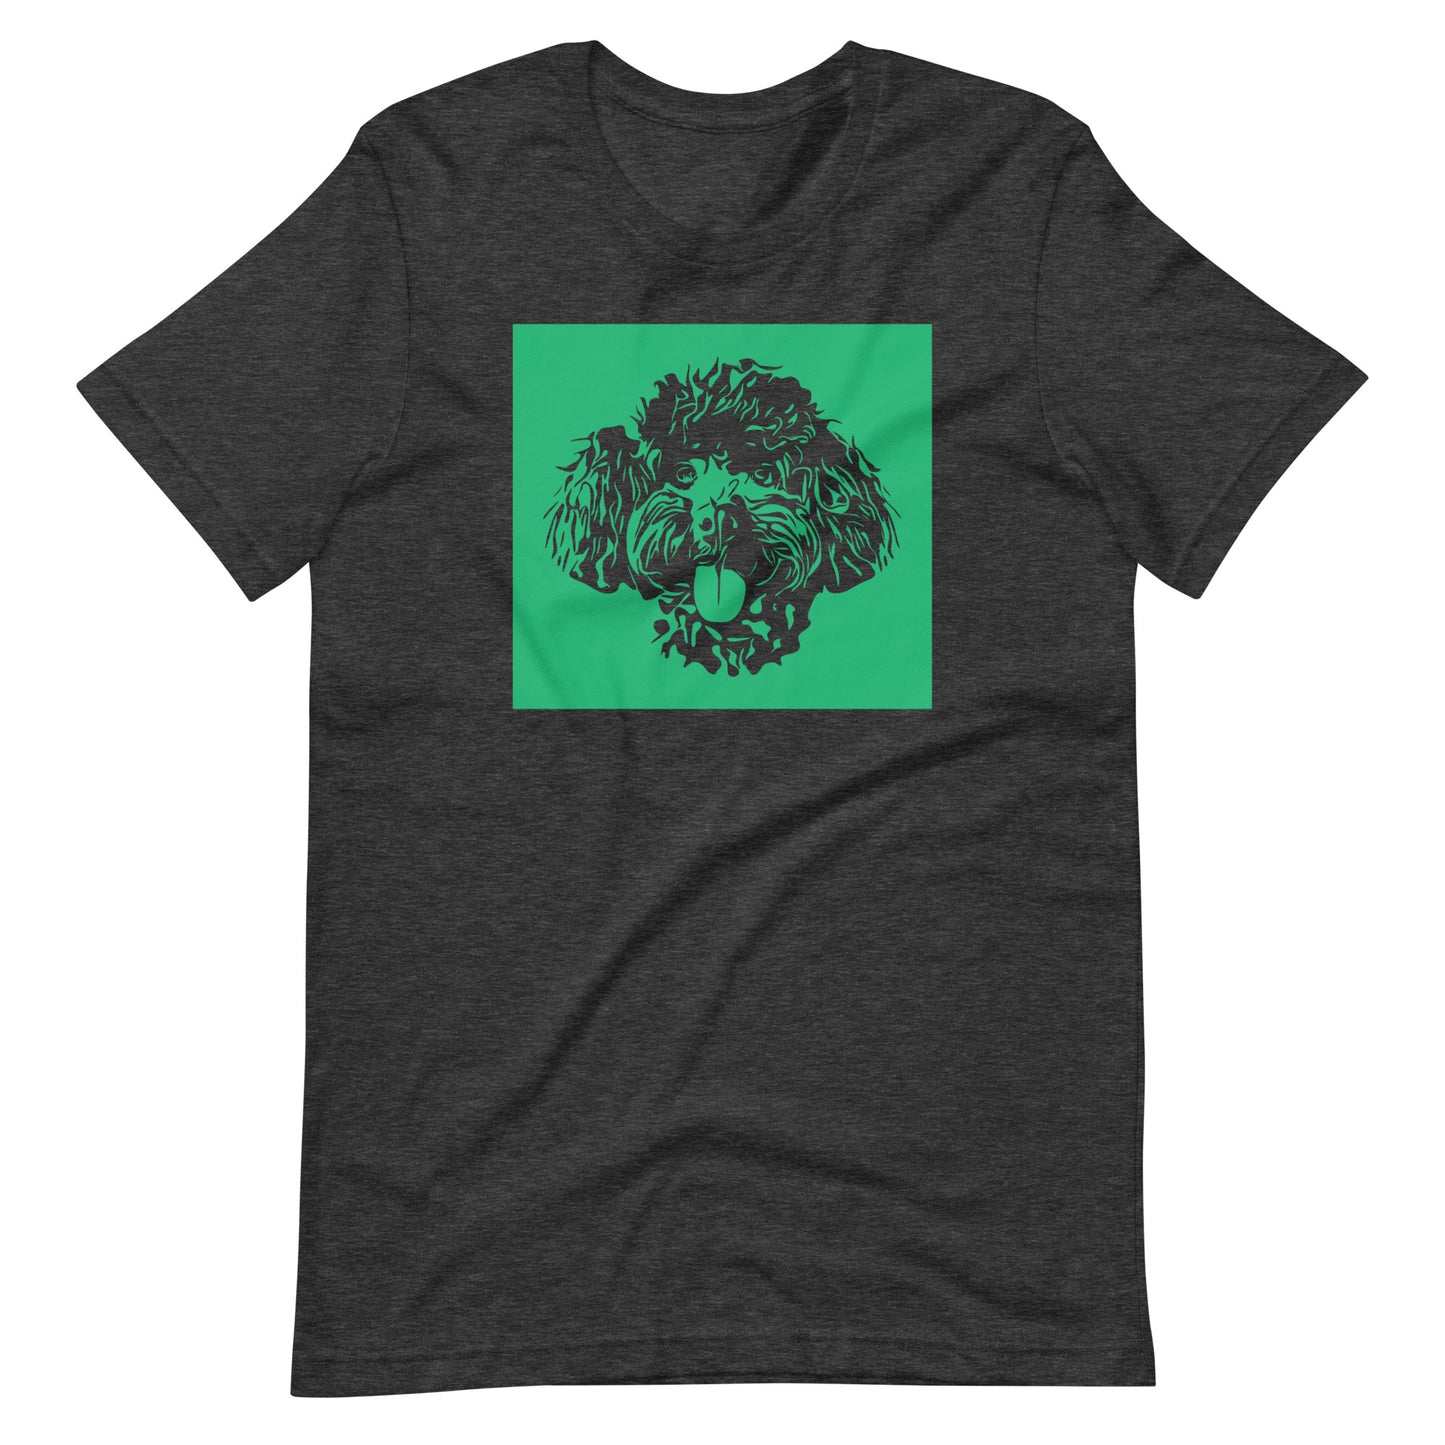 Toy Poodle face silhouette with green background square on unisex dark grey heather t-shirt